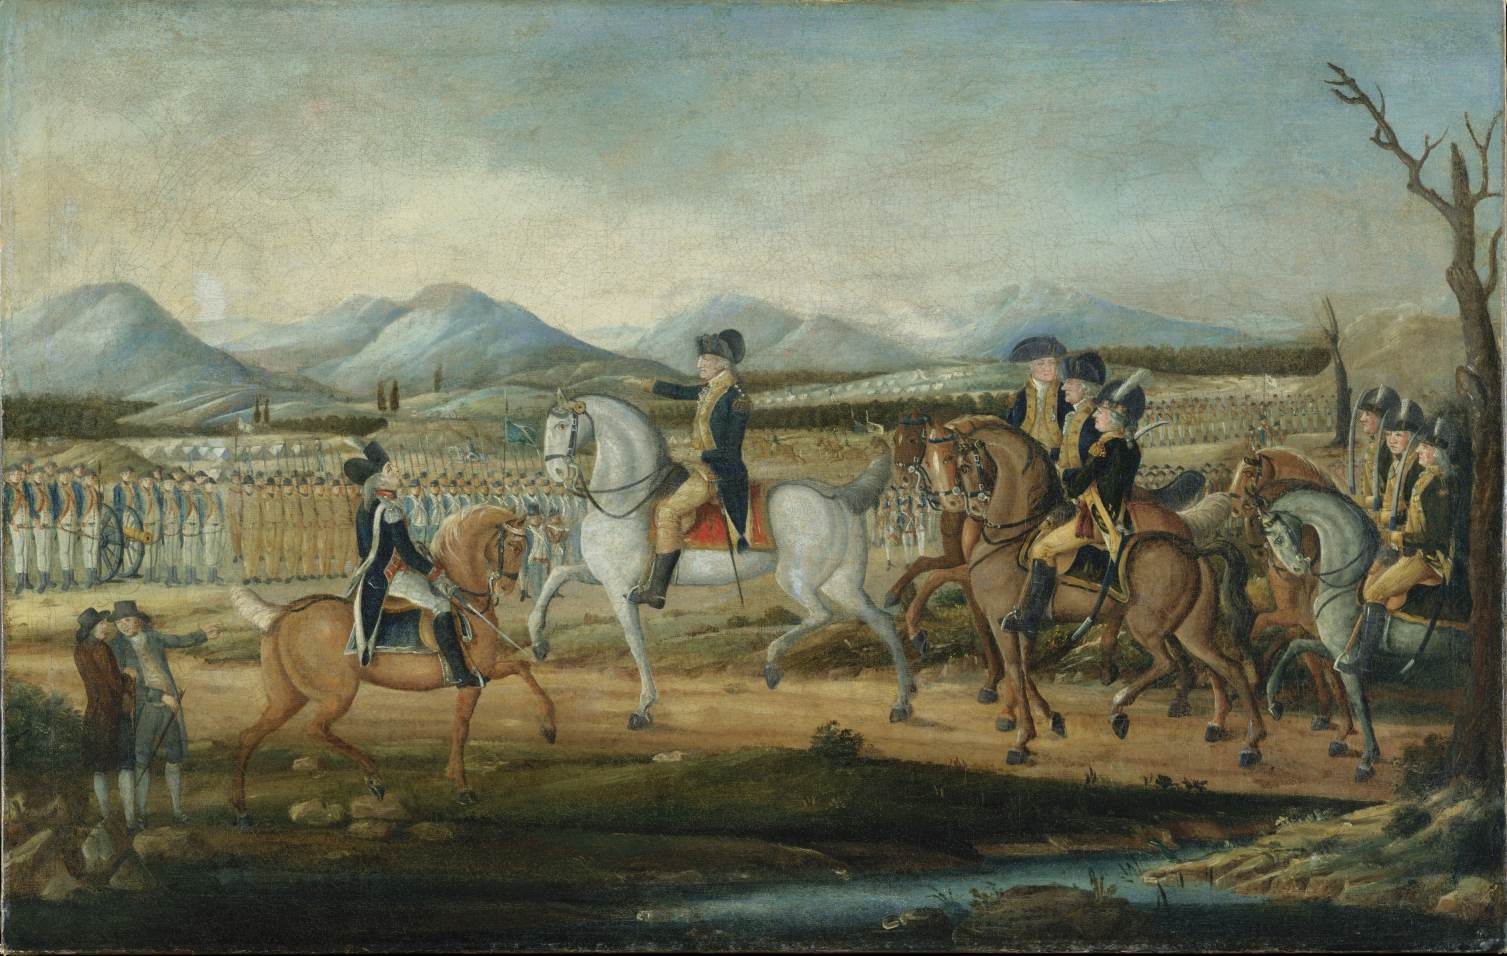 Washington reviewing the troops at Fort Cumberland